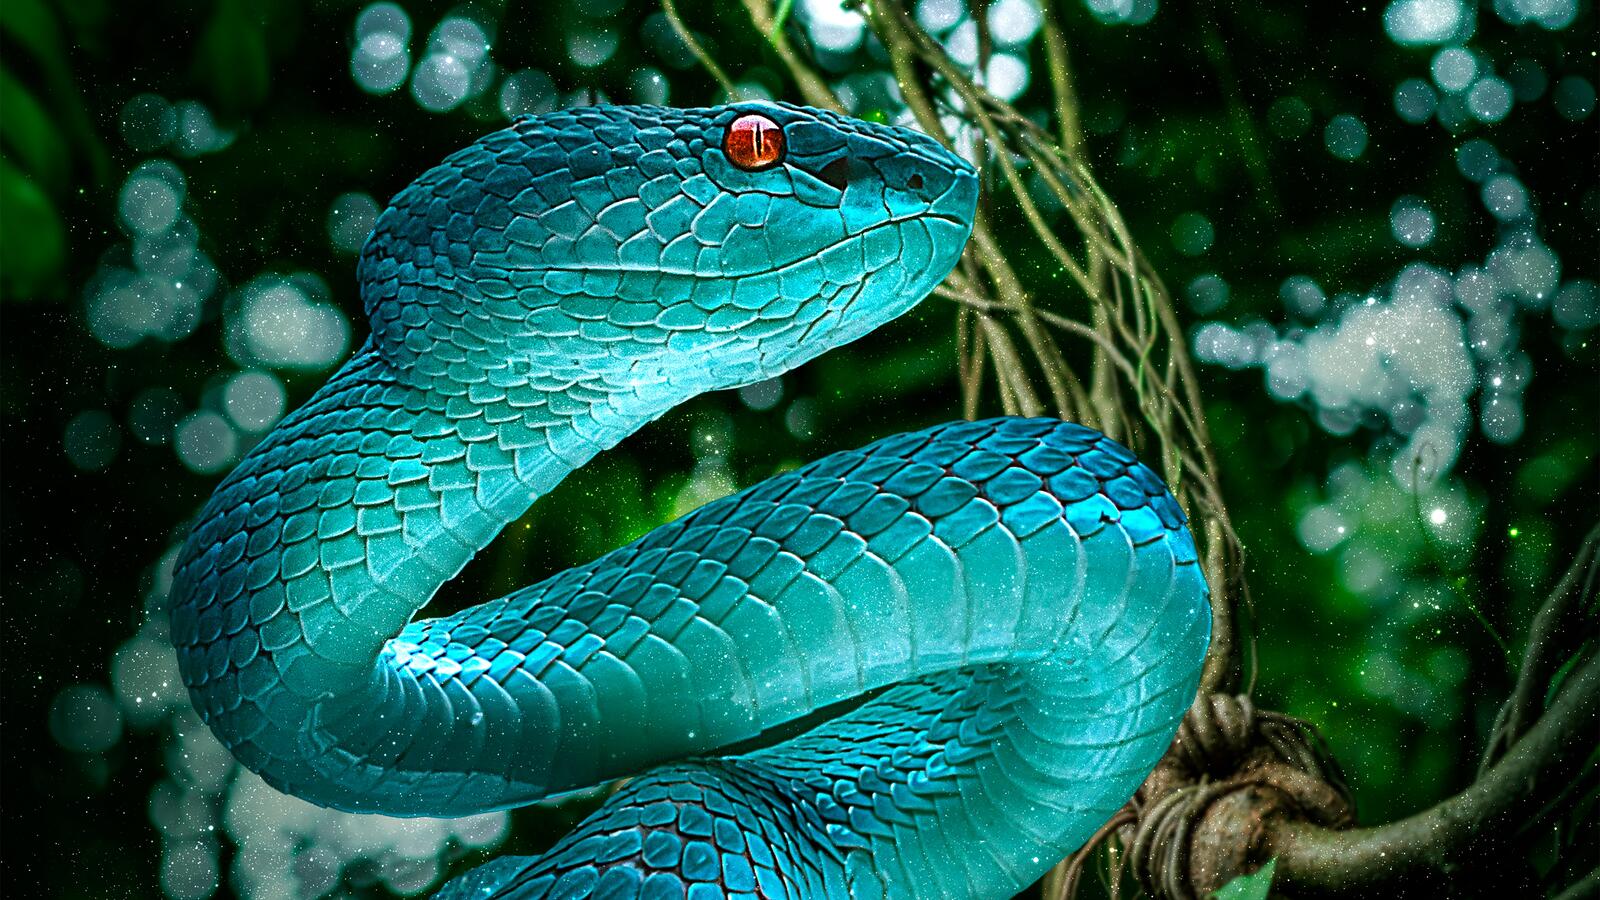 Free photo Bright blue snake with red eyes